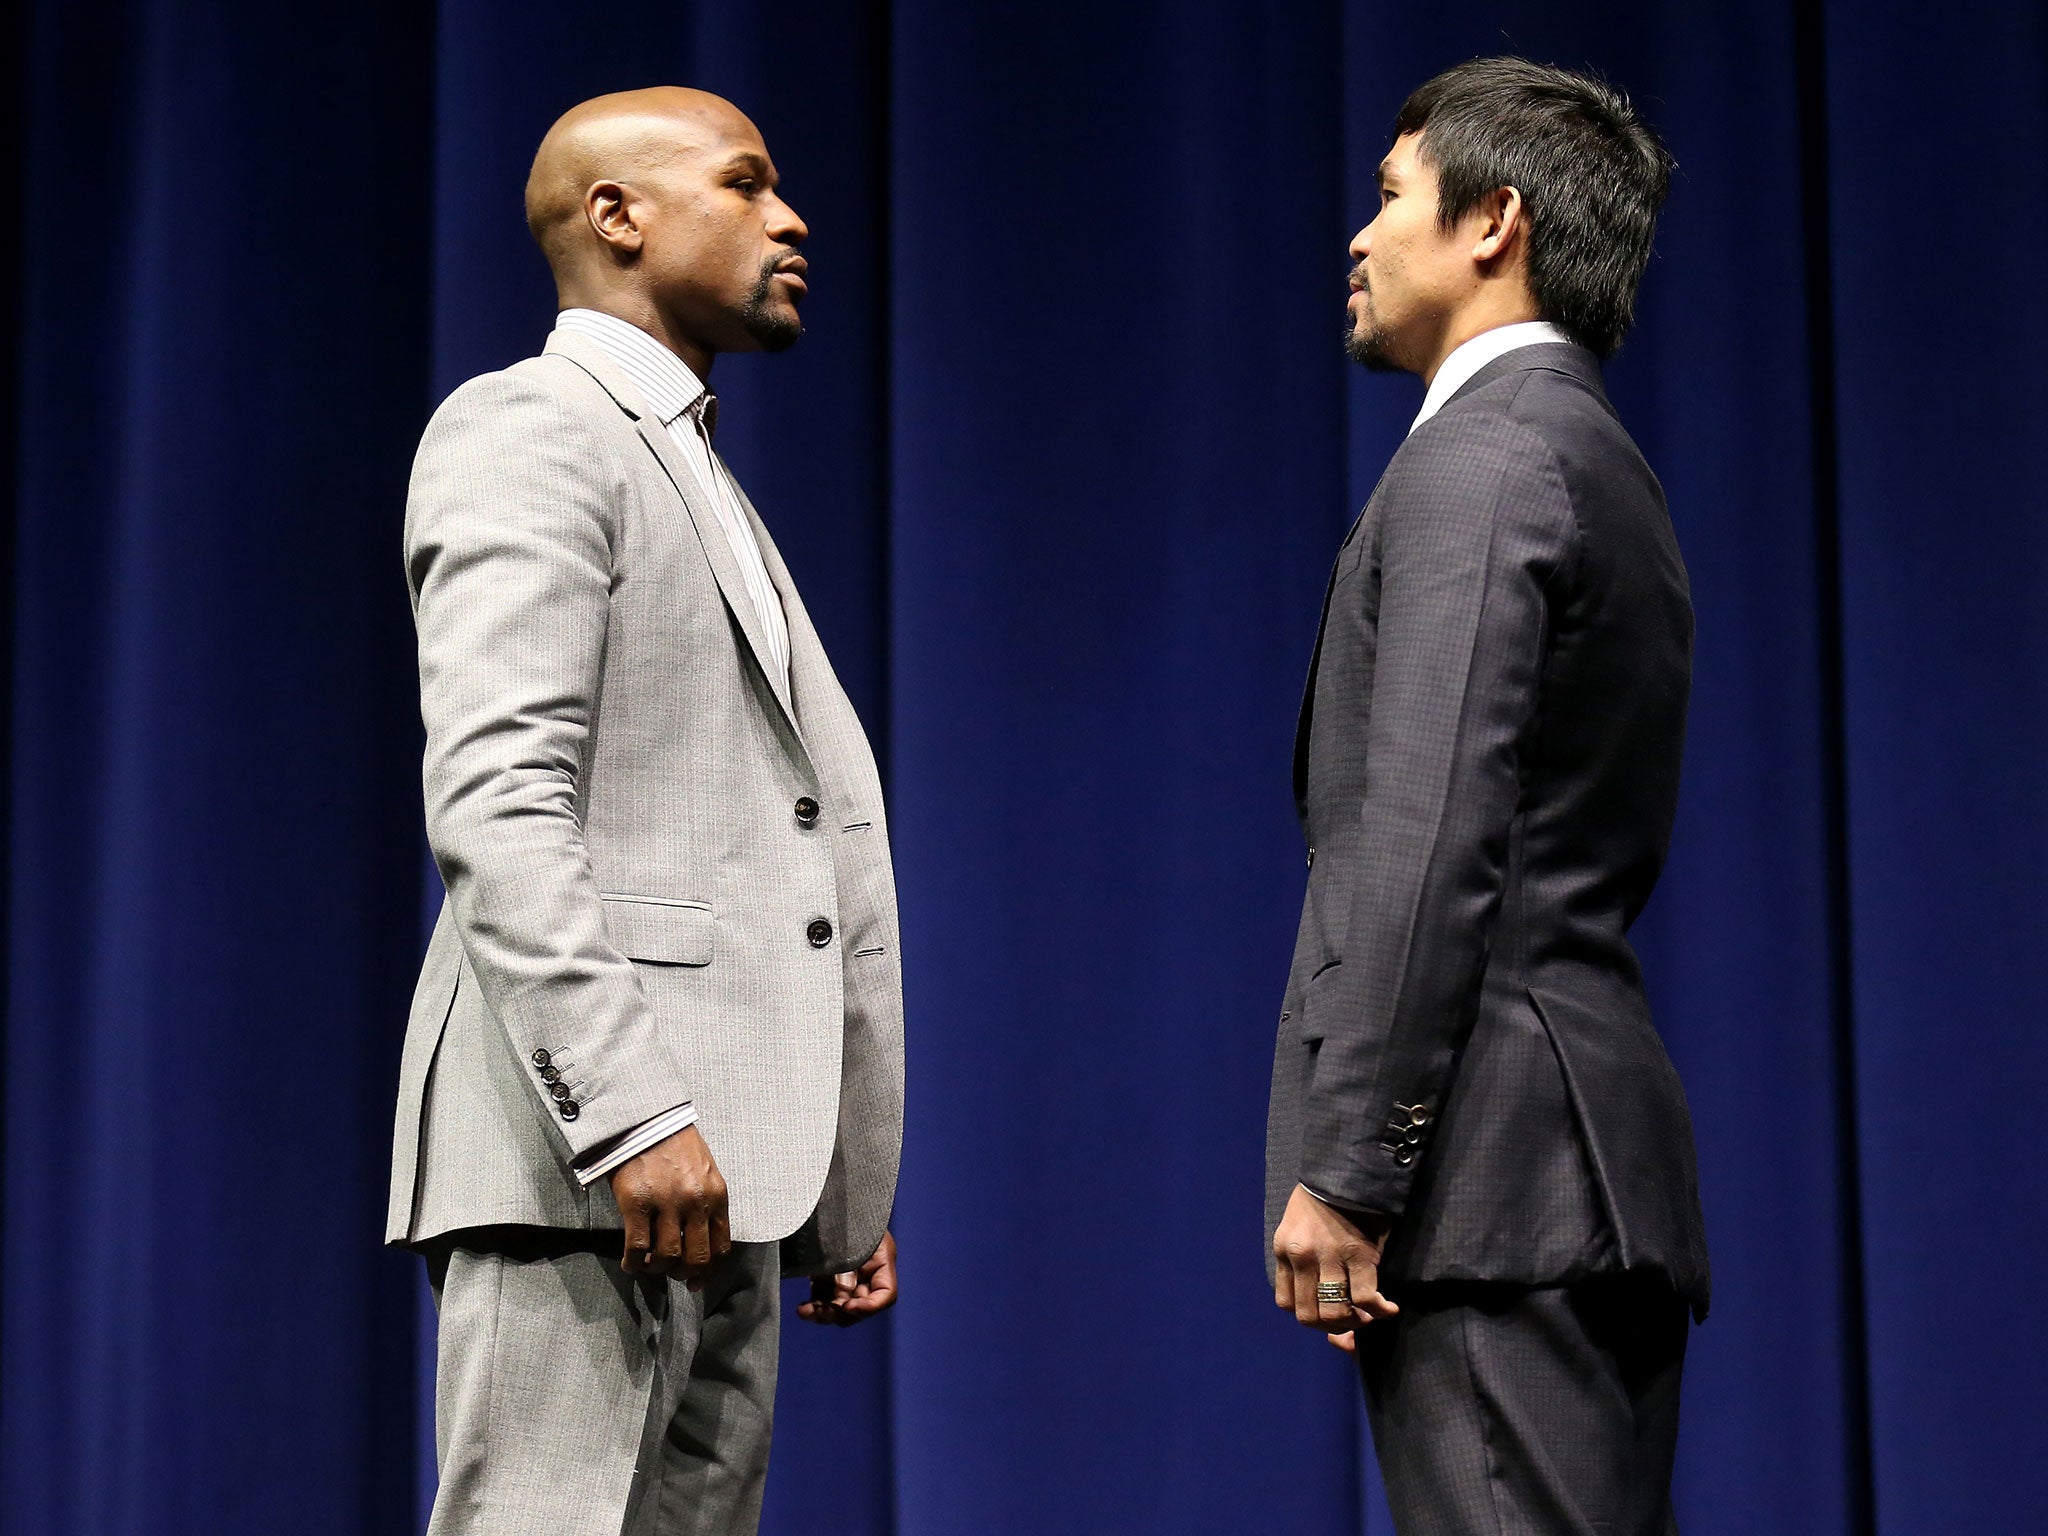 Floyd Mayweather and Manny Pacquiao go head-to-head at their only press conference